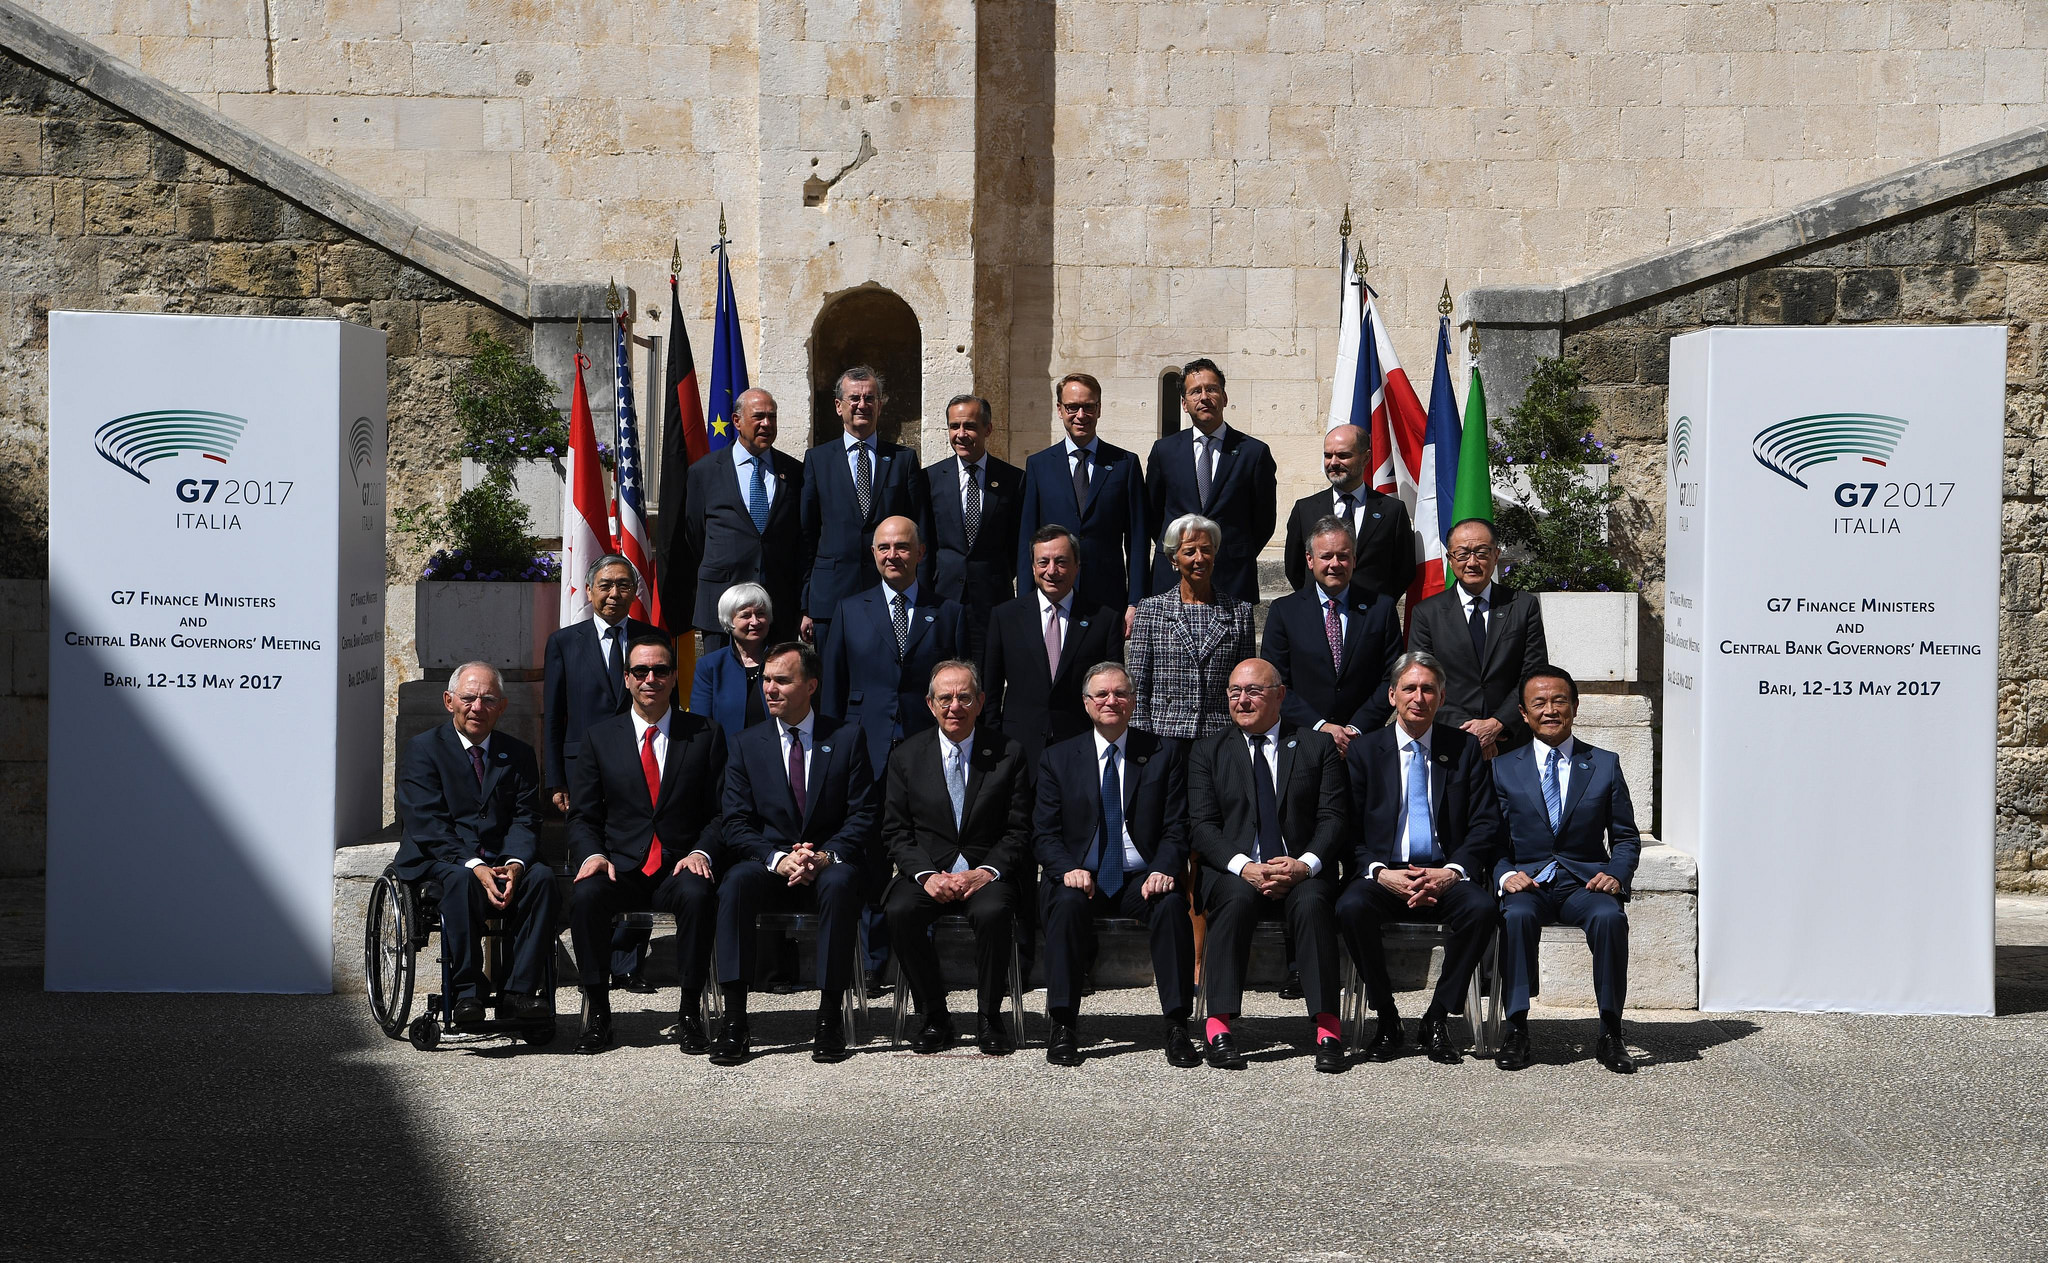 Governor Visco and Minister Padoan at the G7 Finance